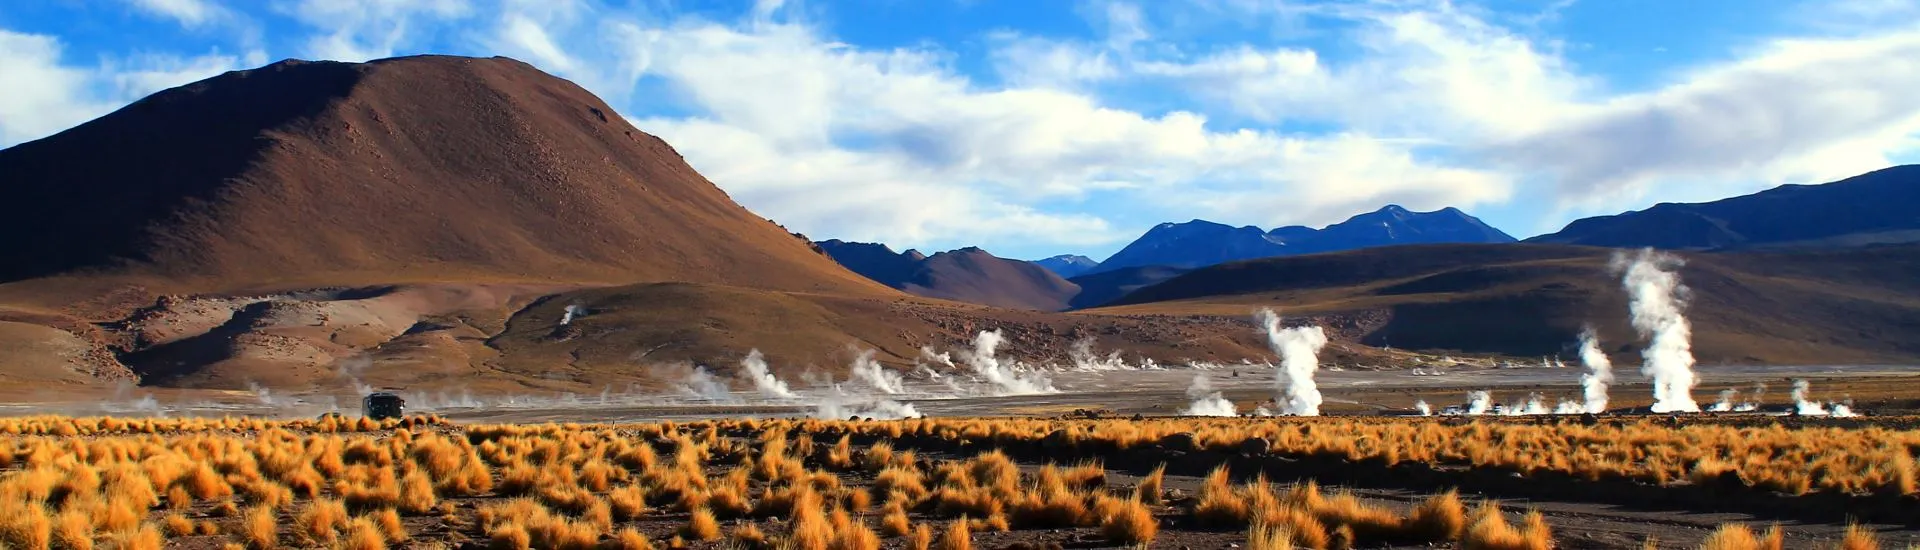 Tatio Geysers and nearby volcanoes in Atacama, Chile